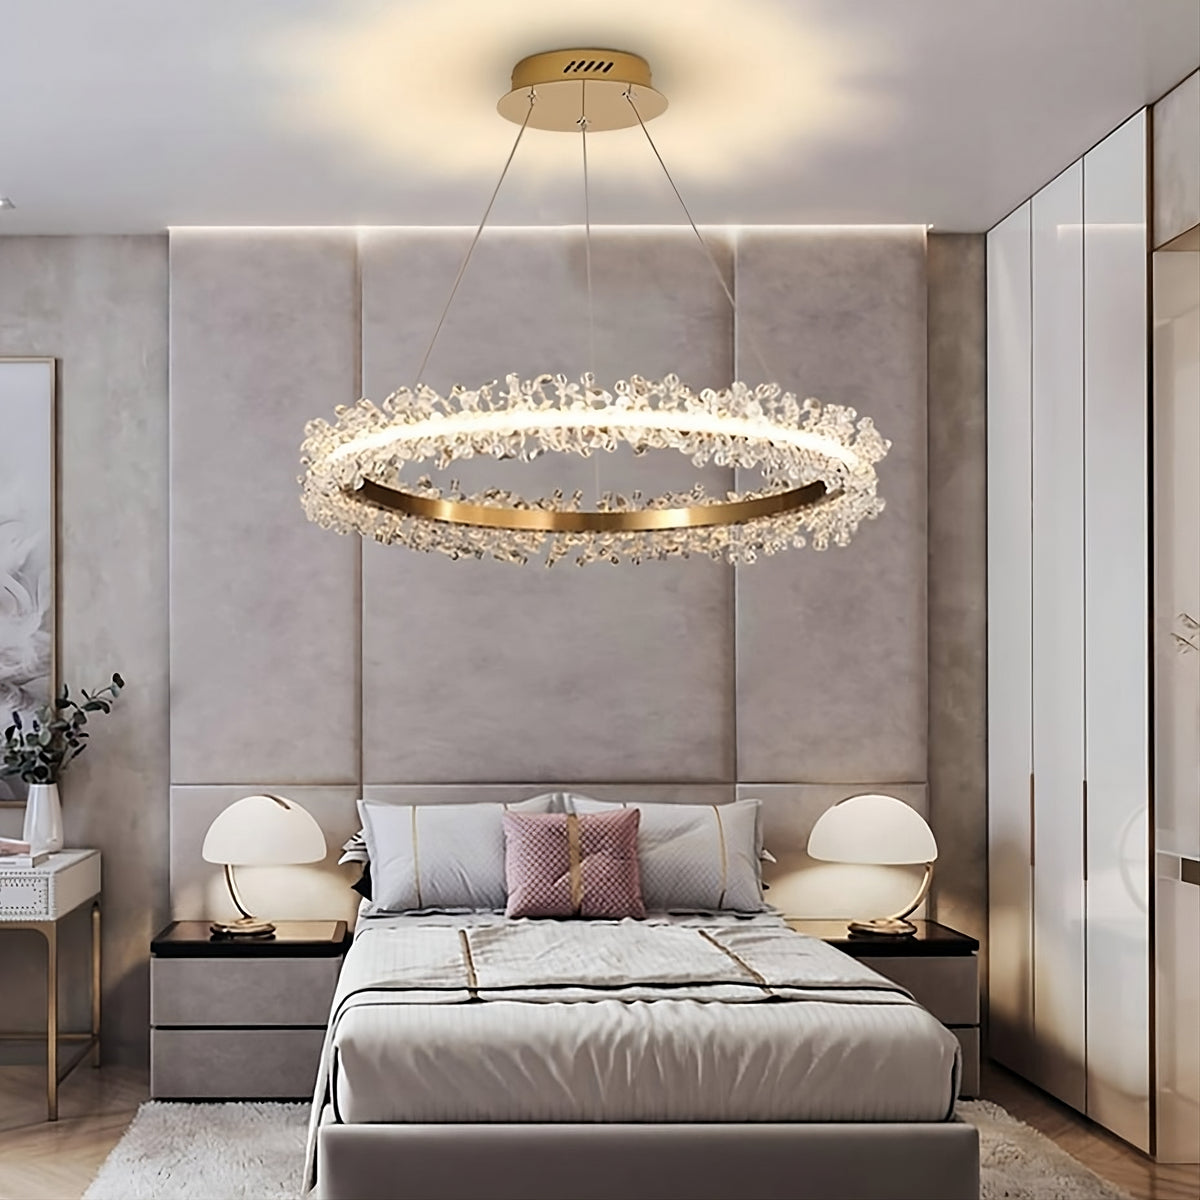 A modern bedroom with a large, circular ceiling chandelier adorned with K9 crystals hanging above a neatly made bed. The **Capri Crystal Ring Chandelier by Morsale.com** flanked by two matching nightstands, each with a lamp featuring a rounded white shade. The room features neutral tones, mirrored closet doors, and a decorative wall behind the bed.